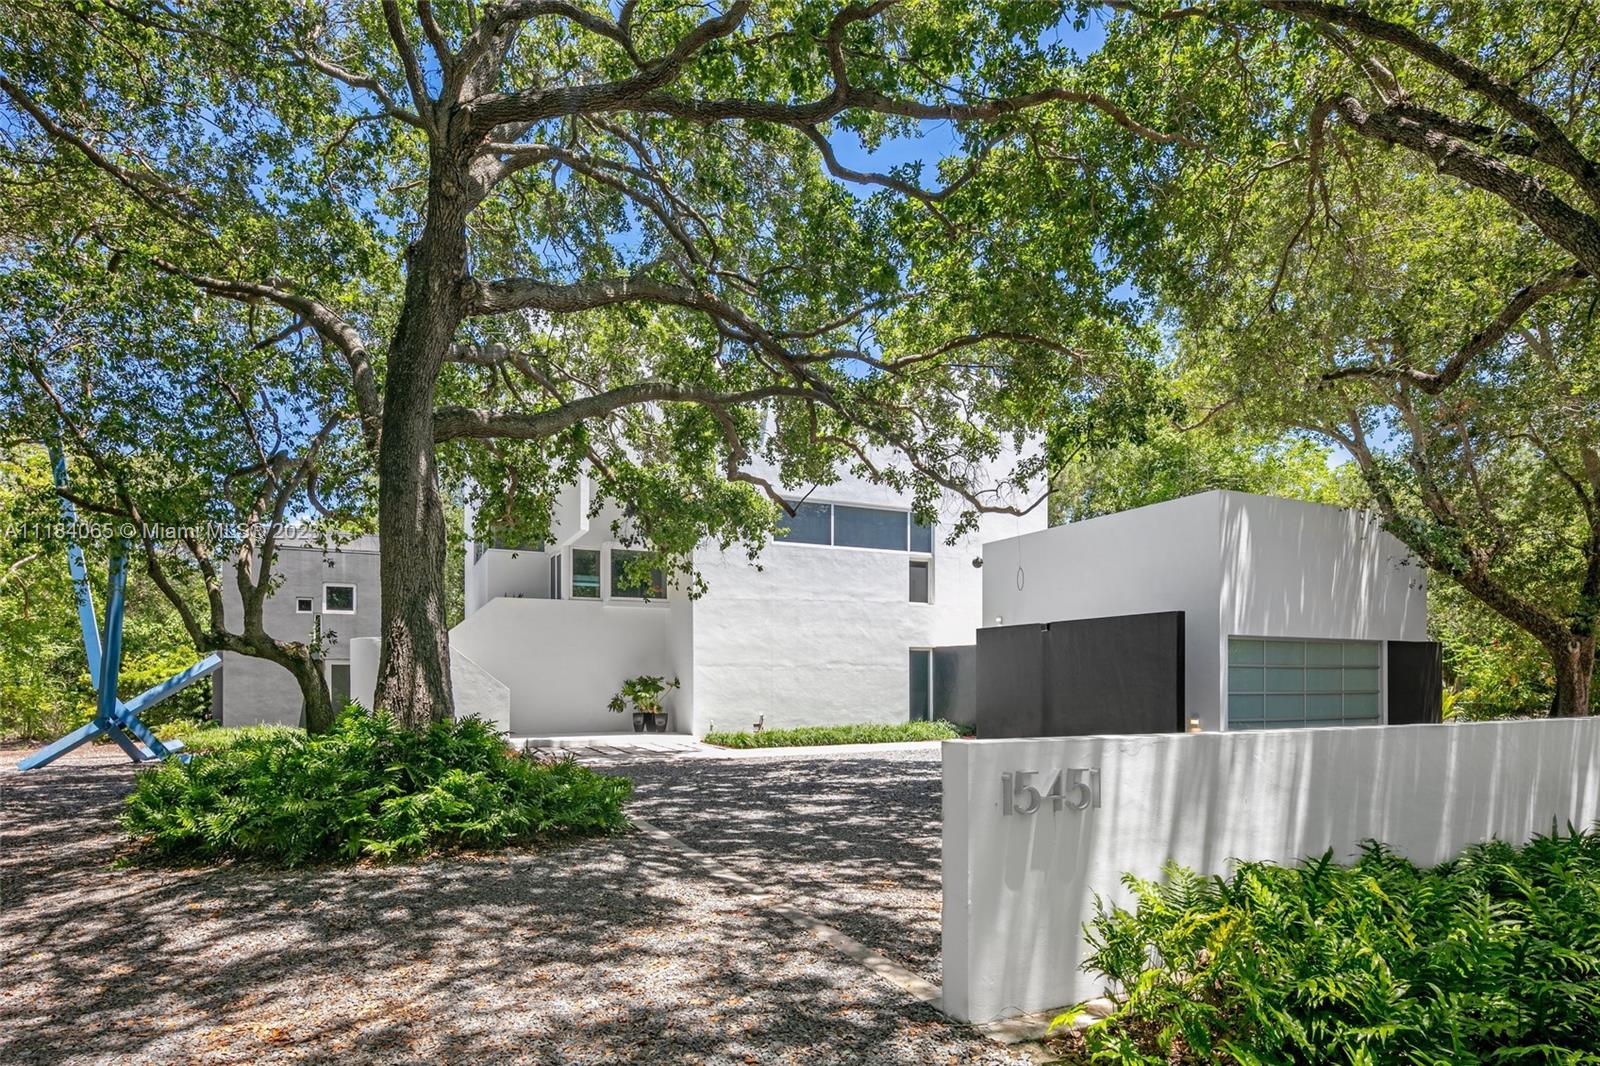 Find your peace at this award-winning, modern architectural masterpiece tucked away in a lush, private landscape. Located in a peaceful, undiscovered pocket, this 7 Bed / 6.5 Bath home boasts 5,451 SF interior and 30,000 SF of land backed onto the Deering Estate Preserve. Originally commissioned by a collector, the Whitton House is designed to showcase fine art. So much so, that it has hosted guests the likes of Warhol, Calder and Lichtenstein. The main house is highlighted by its high ceilings, large windows, library, media & office. The guest house's separate kitchen and private entrances make it perfect for in-laws or a dedicated home office. Paired with its privacy, the home offers unparalleled proximity to the area's top schools. Enjoy this blend of privacy, art and design today.